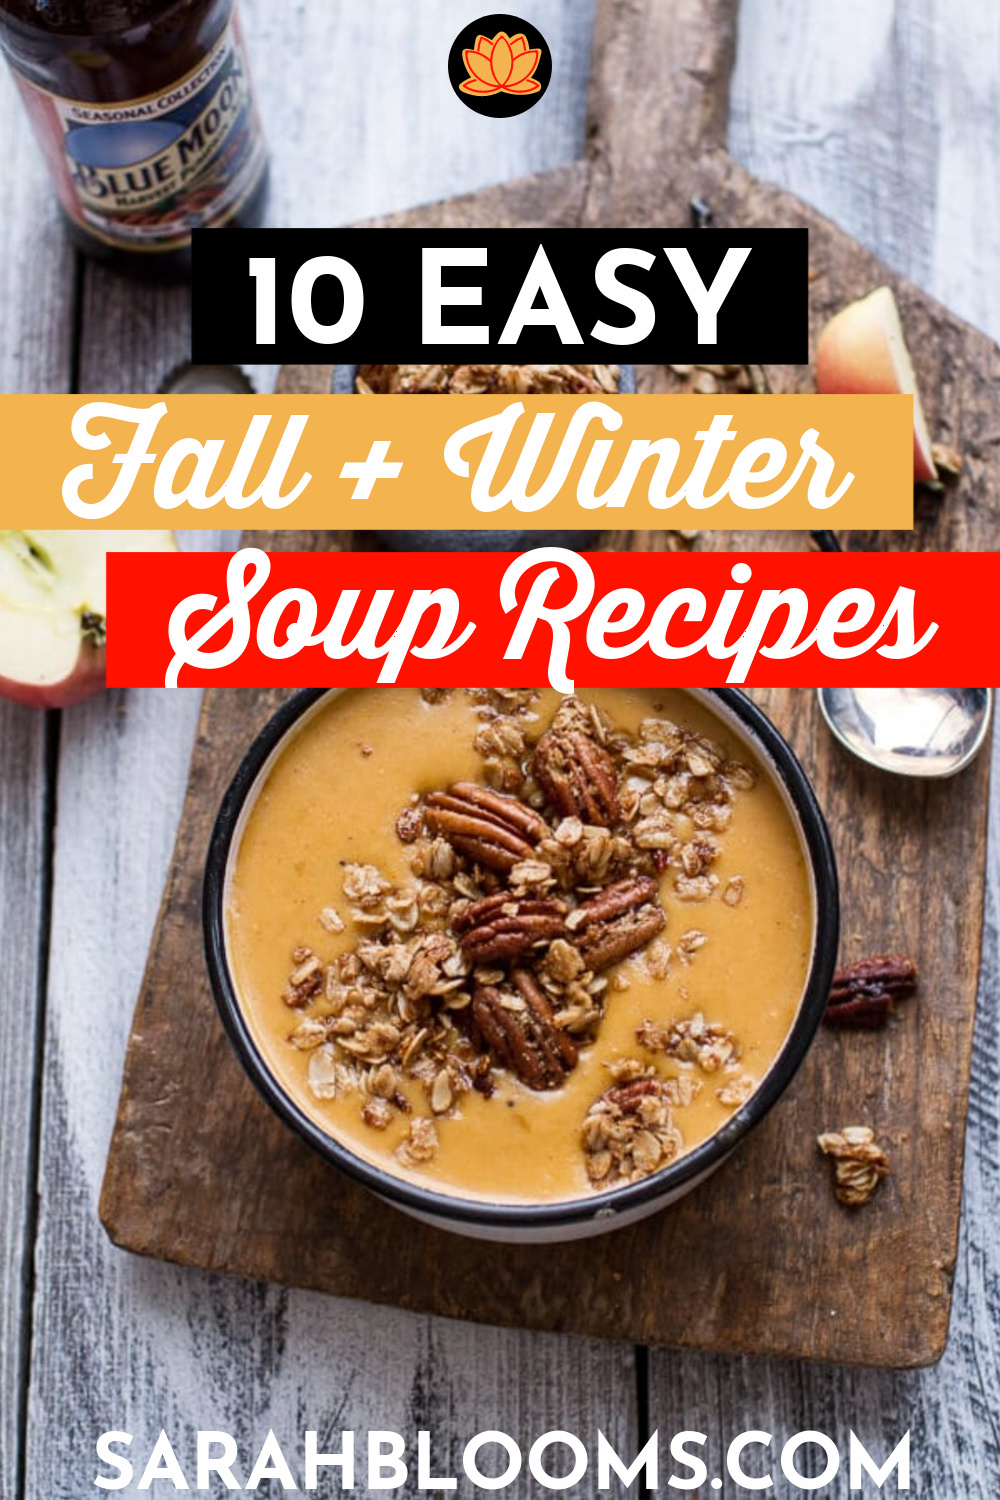 Warm up when it's cold outside with these Easy Warming Soup Recipes that will help you eat a healthy, hearty meal any night of the week! Enjoy a healthy, hearty meal any night of the week with these 10 Yummy Soup Recipes perfect for fall and winter! #souprecipes #bestsoups #fallrecipes #comfortfoods #comfortrecipes #warmingsoups #warmingrecipes